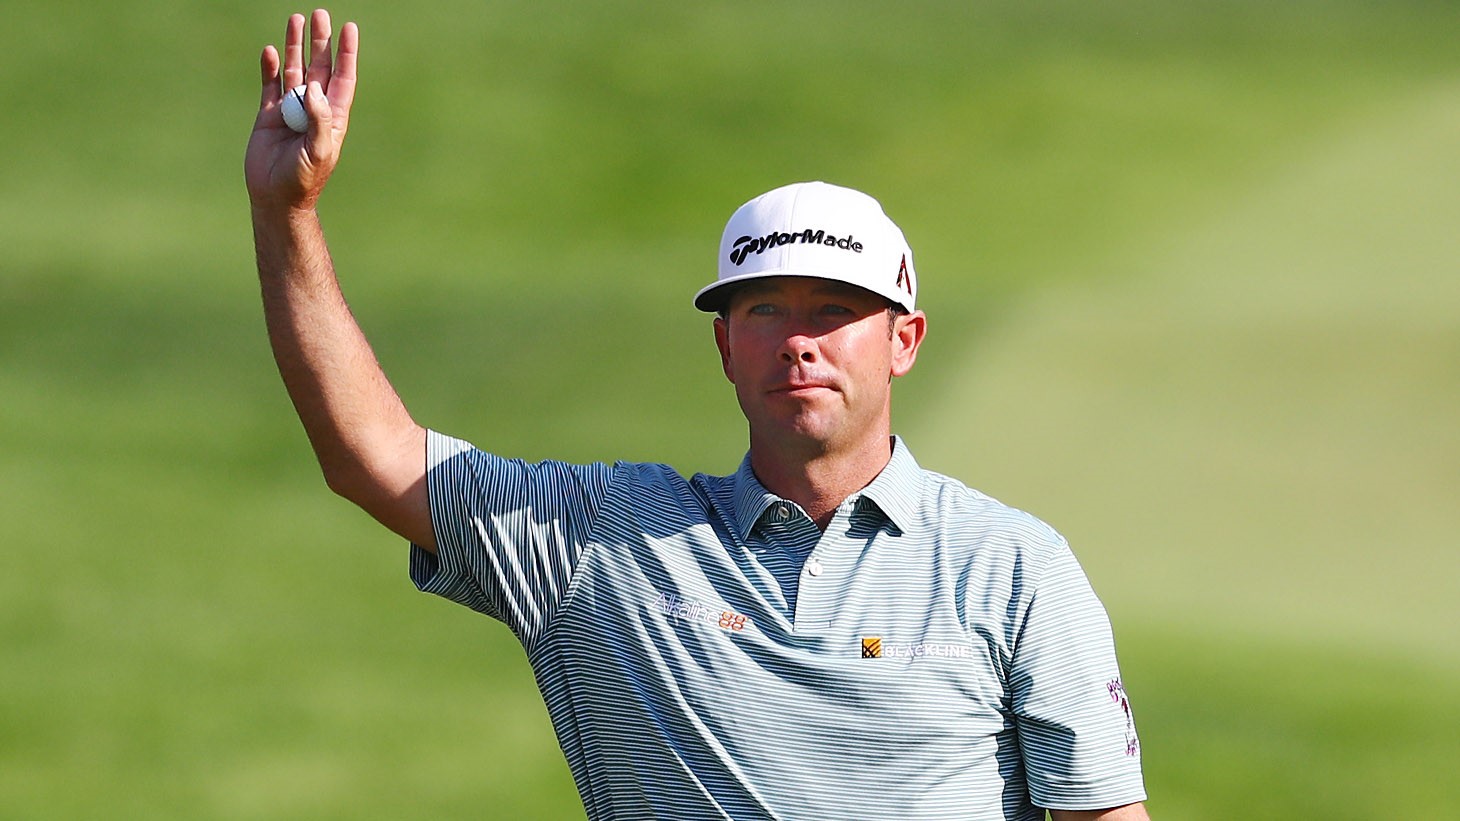 Chez Reavie raises his Pro V1 golf ball after sinking his winning putt at the 2019 Travelers Championship, the 100th victory this season for Titleist golf ball players.